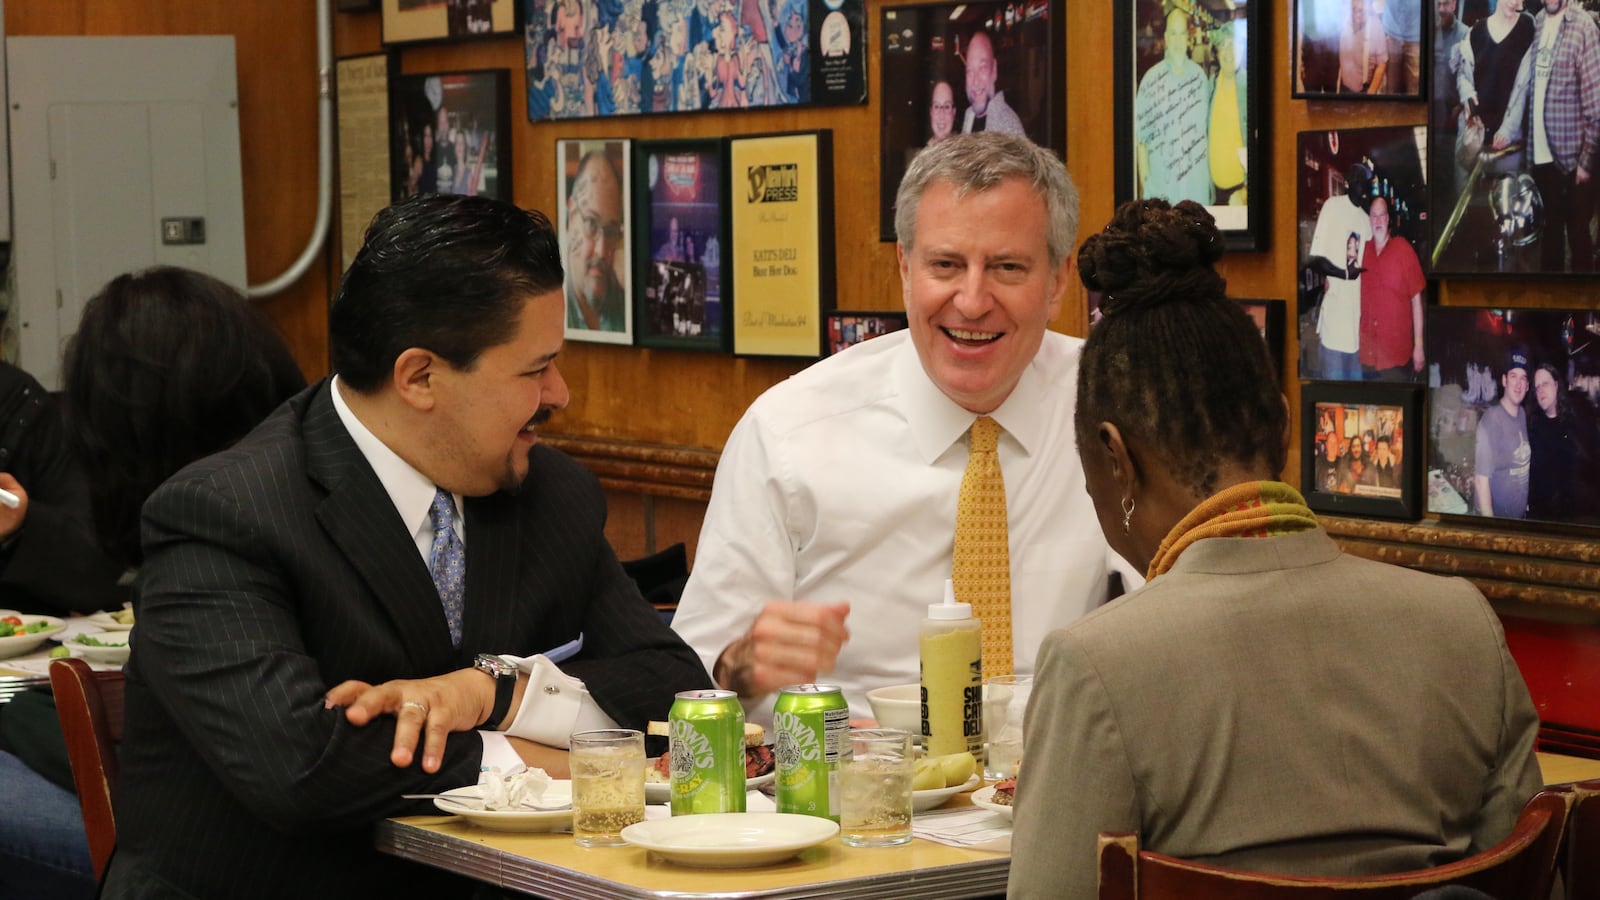 Richard Carranza joined Mayor Bill de Blasio and First Lady Chirlane McCray for lunch at Katz's Deli on his first day as chancellor.